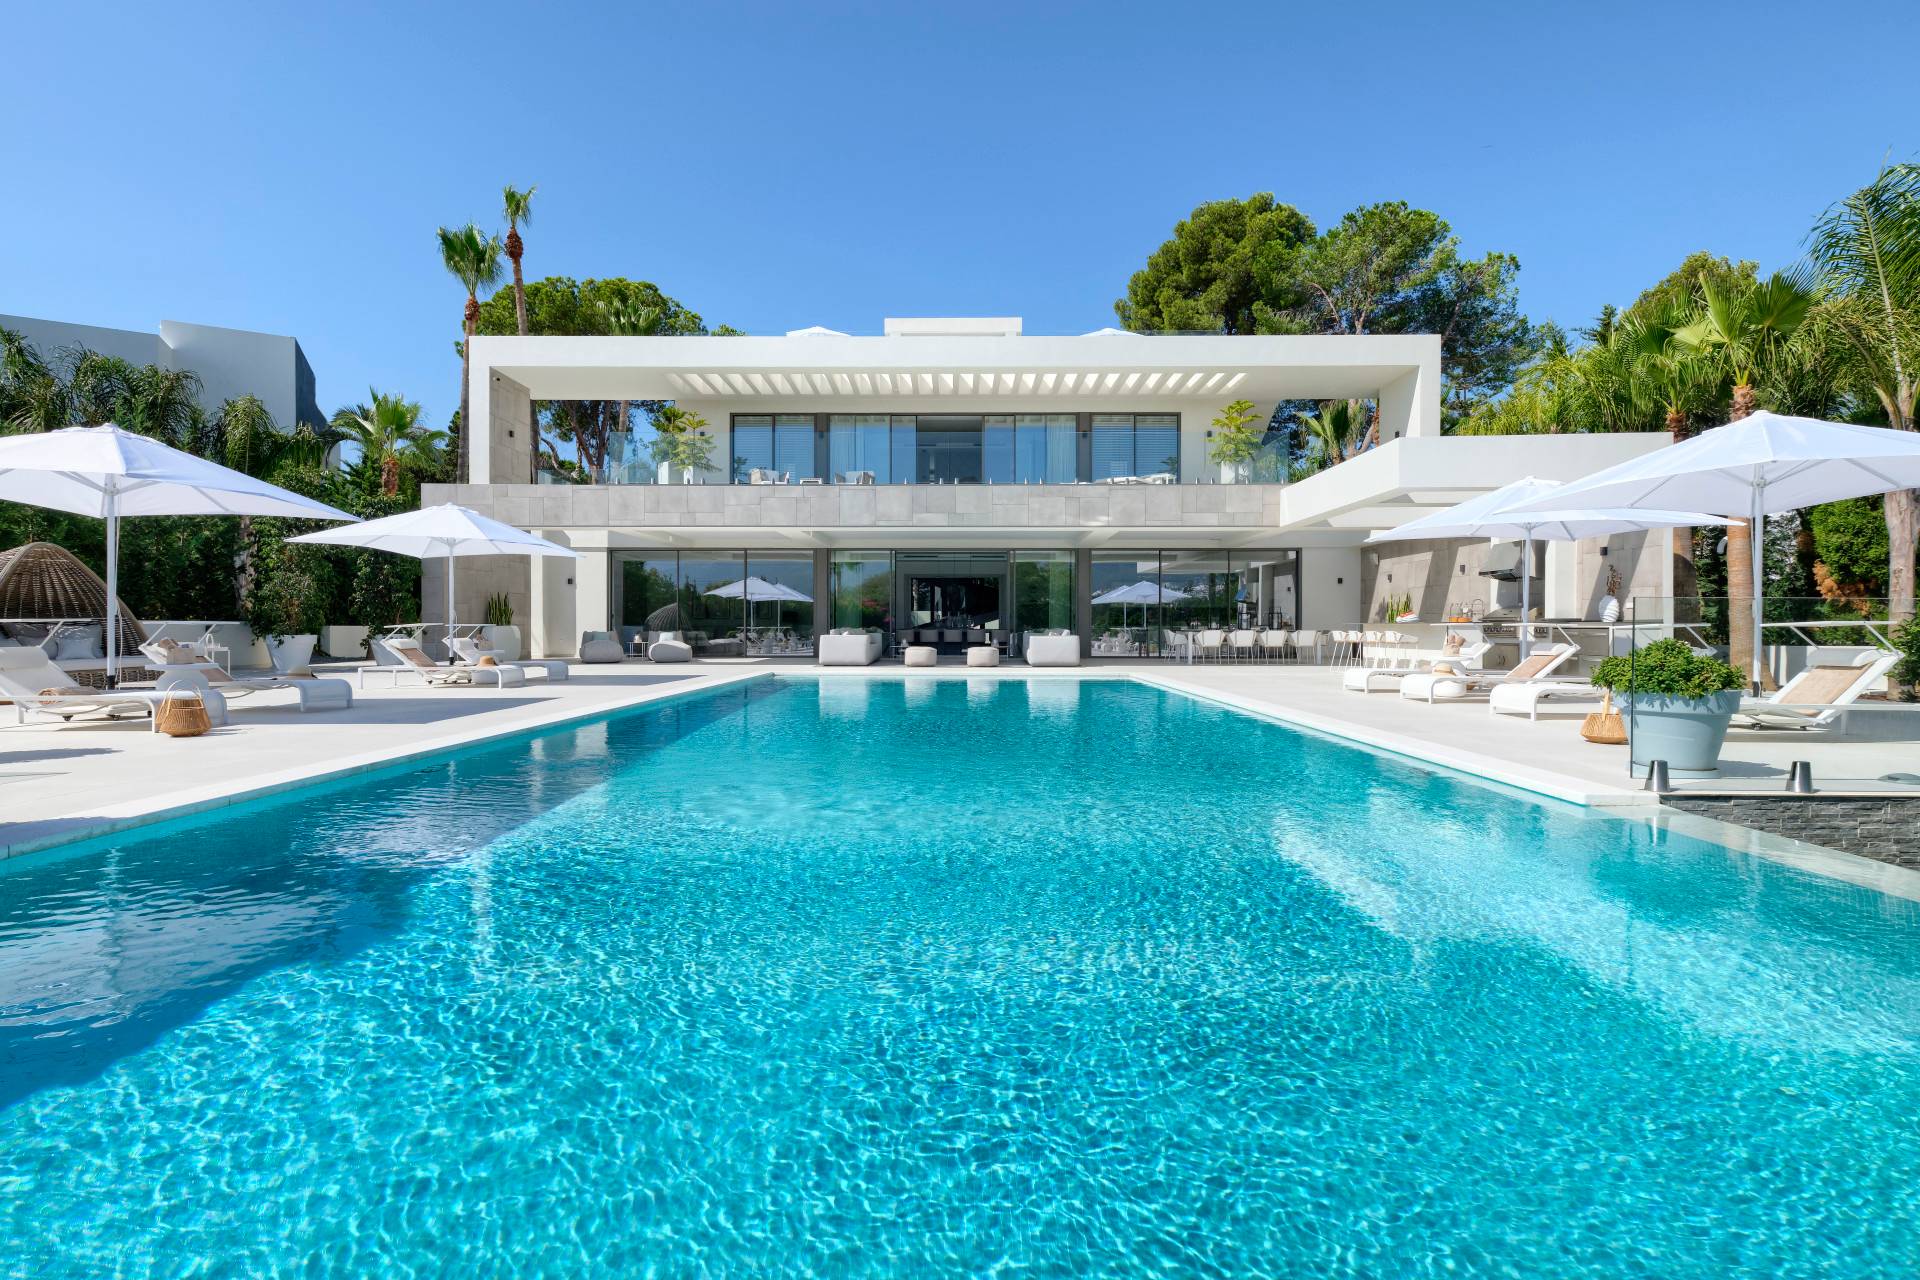 This absolutely fascinating state of art spectacular property will be your perfect Mediterranean home if your lifestyle includes modern chic, comfort, security, enjoyment and a bit of extras.